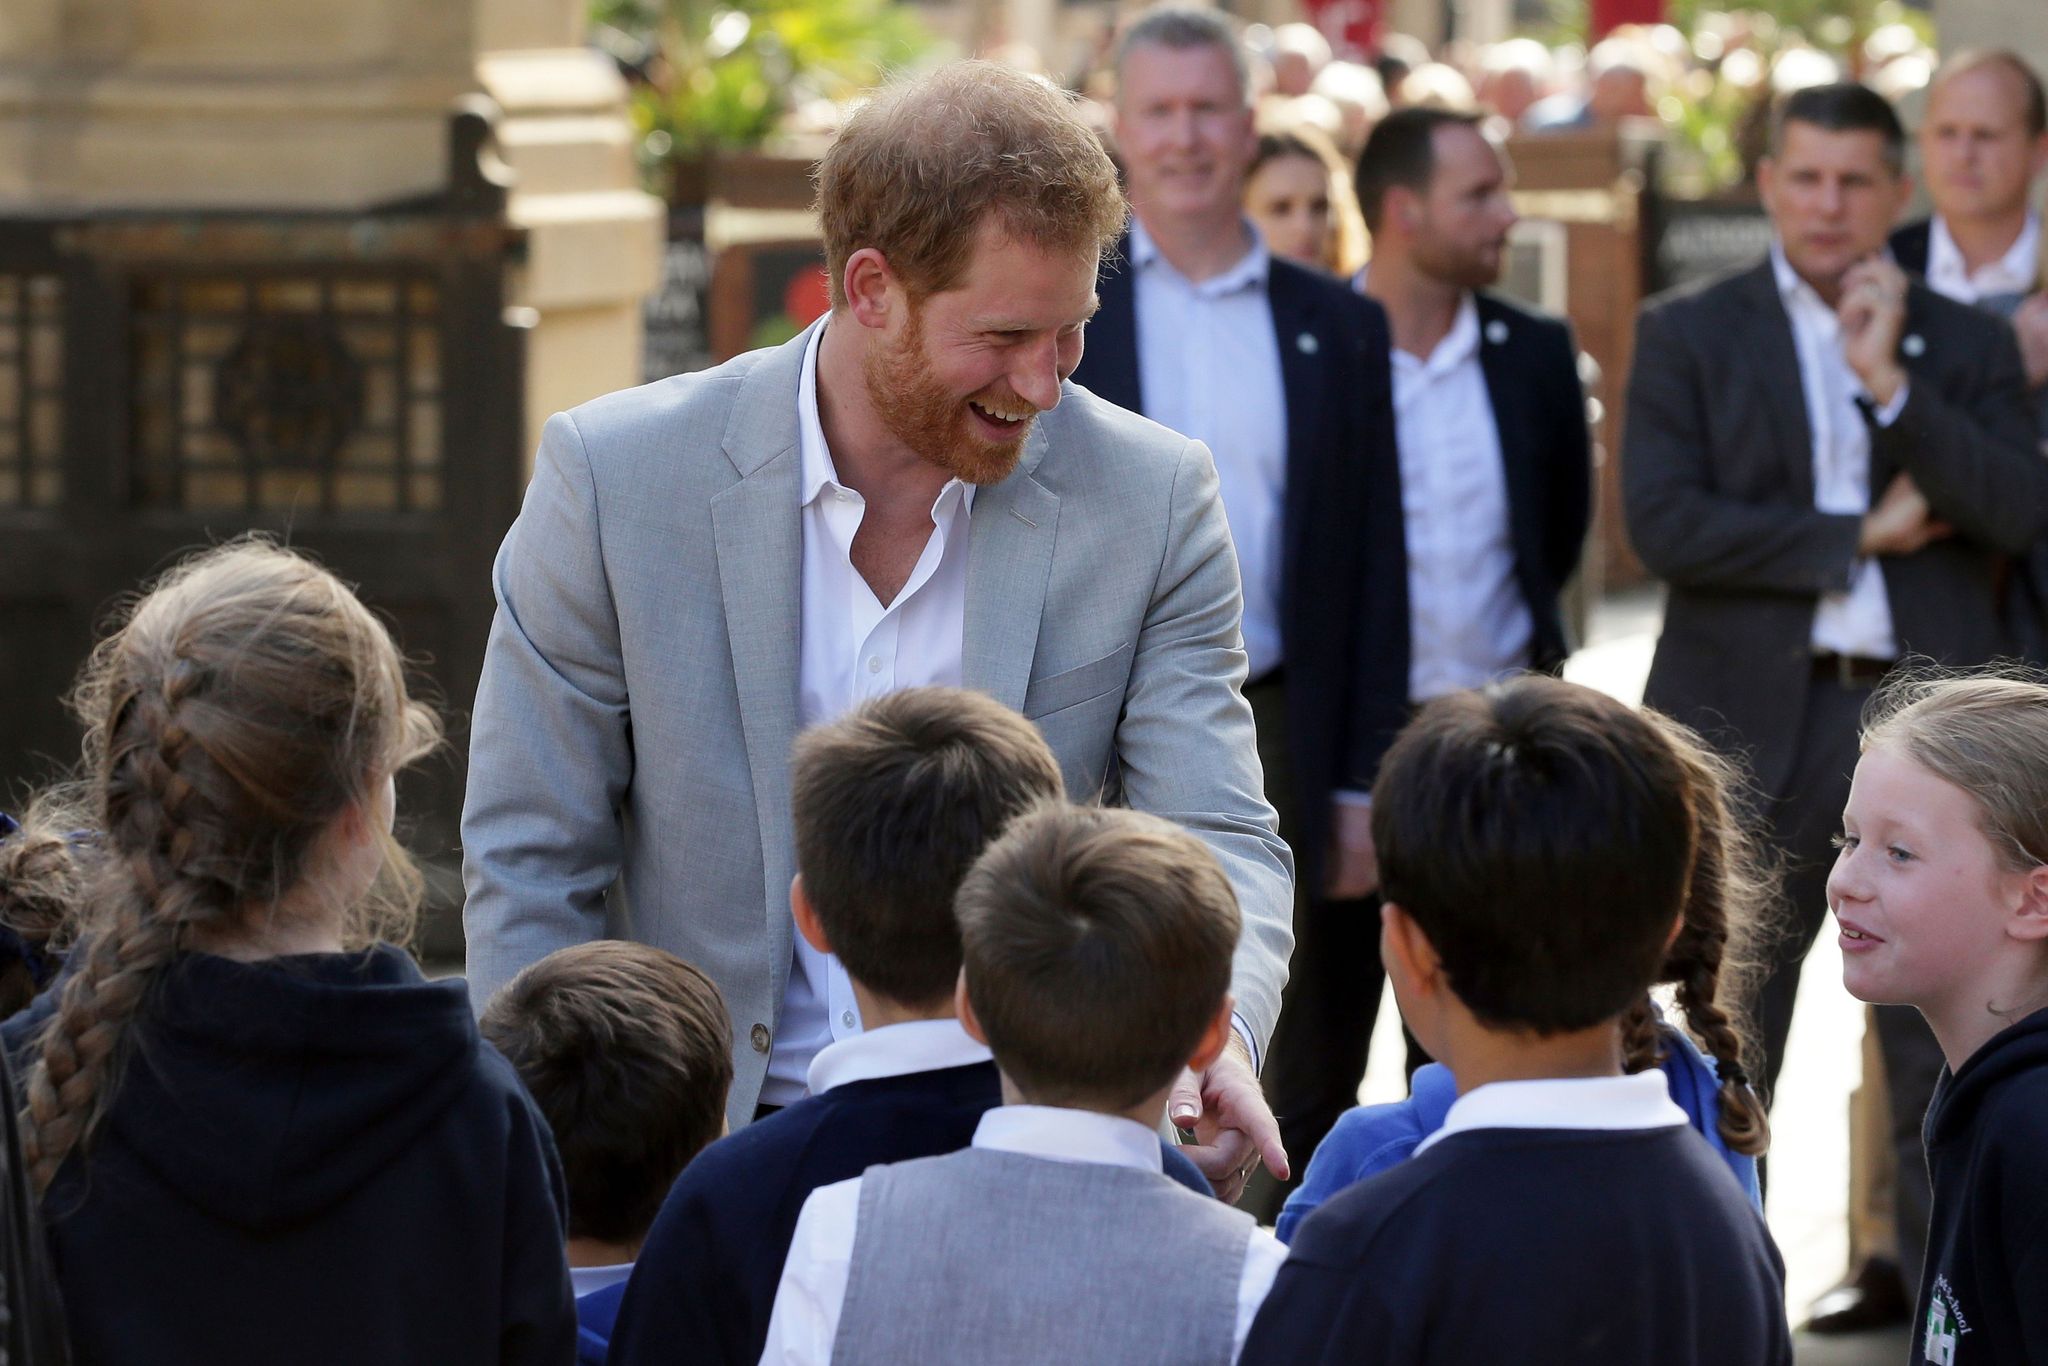 Prince Harry in Sussex